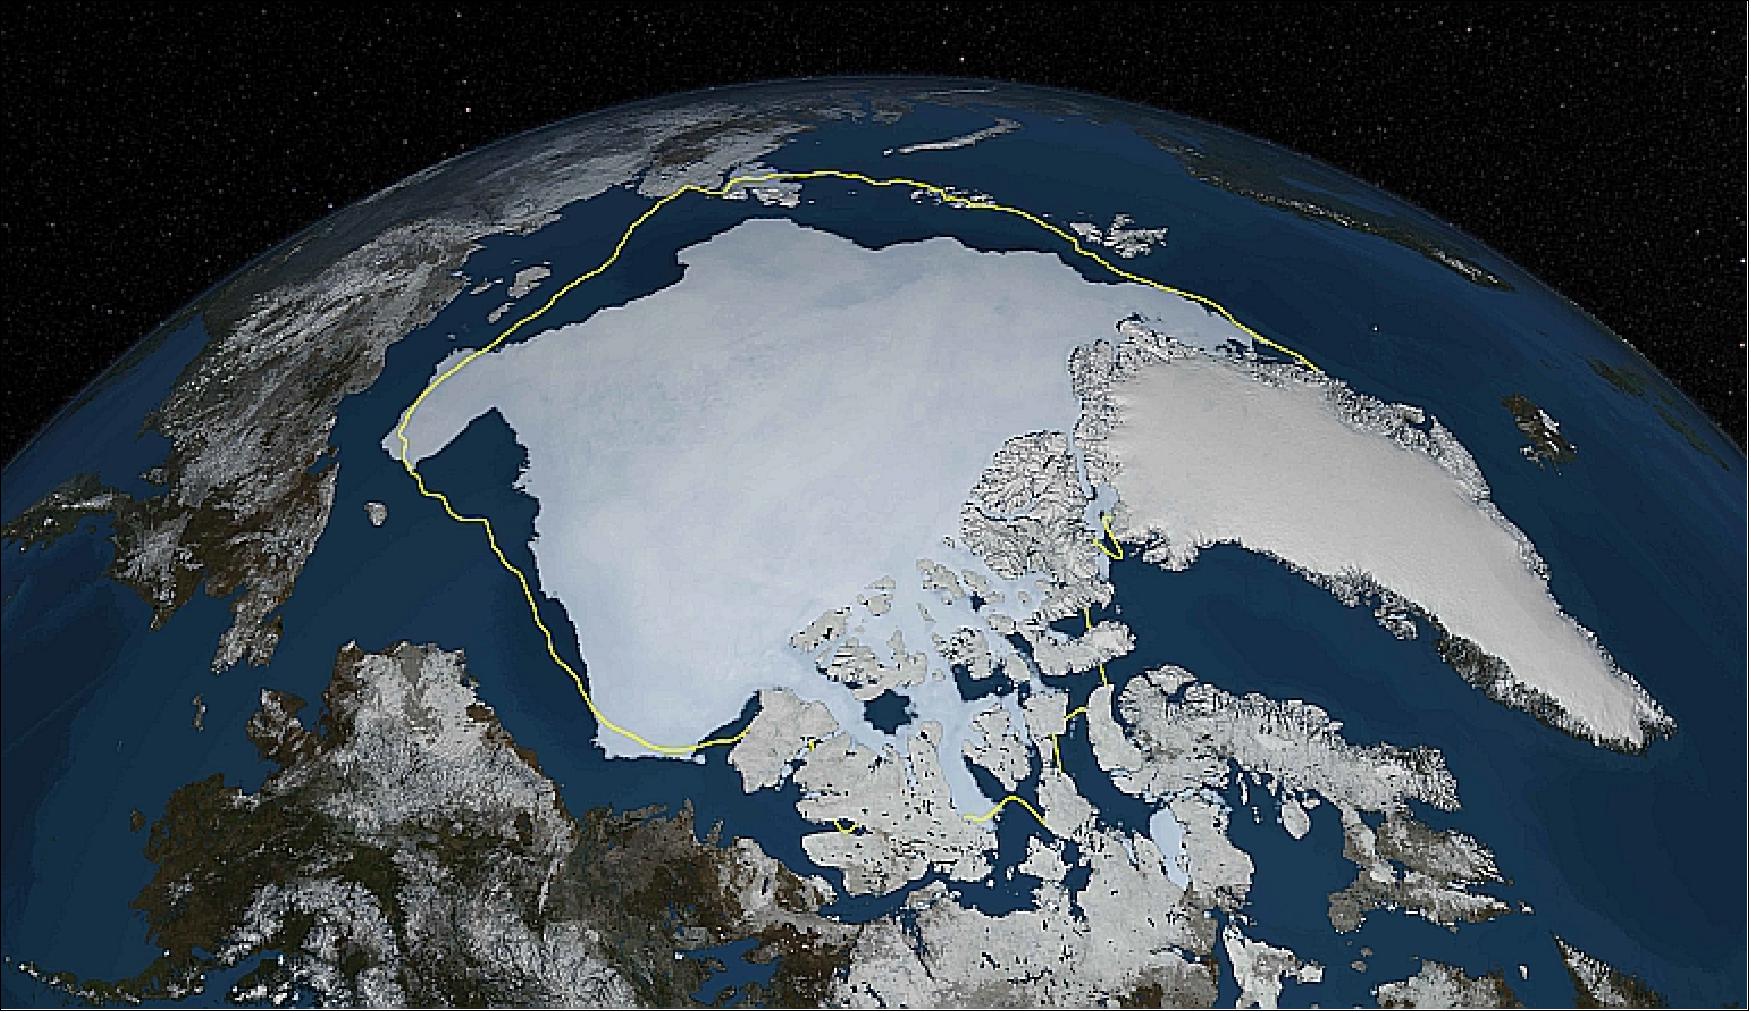 Figure 17: This image shows the extent of Arctic sea ice on September 12, 2013, the day before NSIDC estimated sea ice extent hit its annual minimum (image credit: NASA) 48)